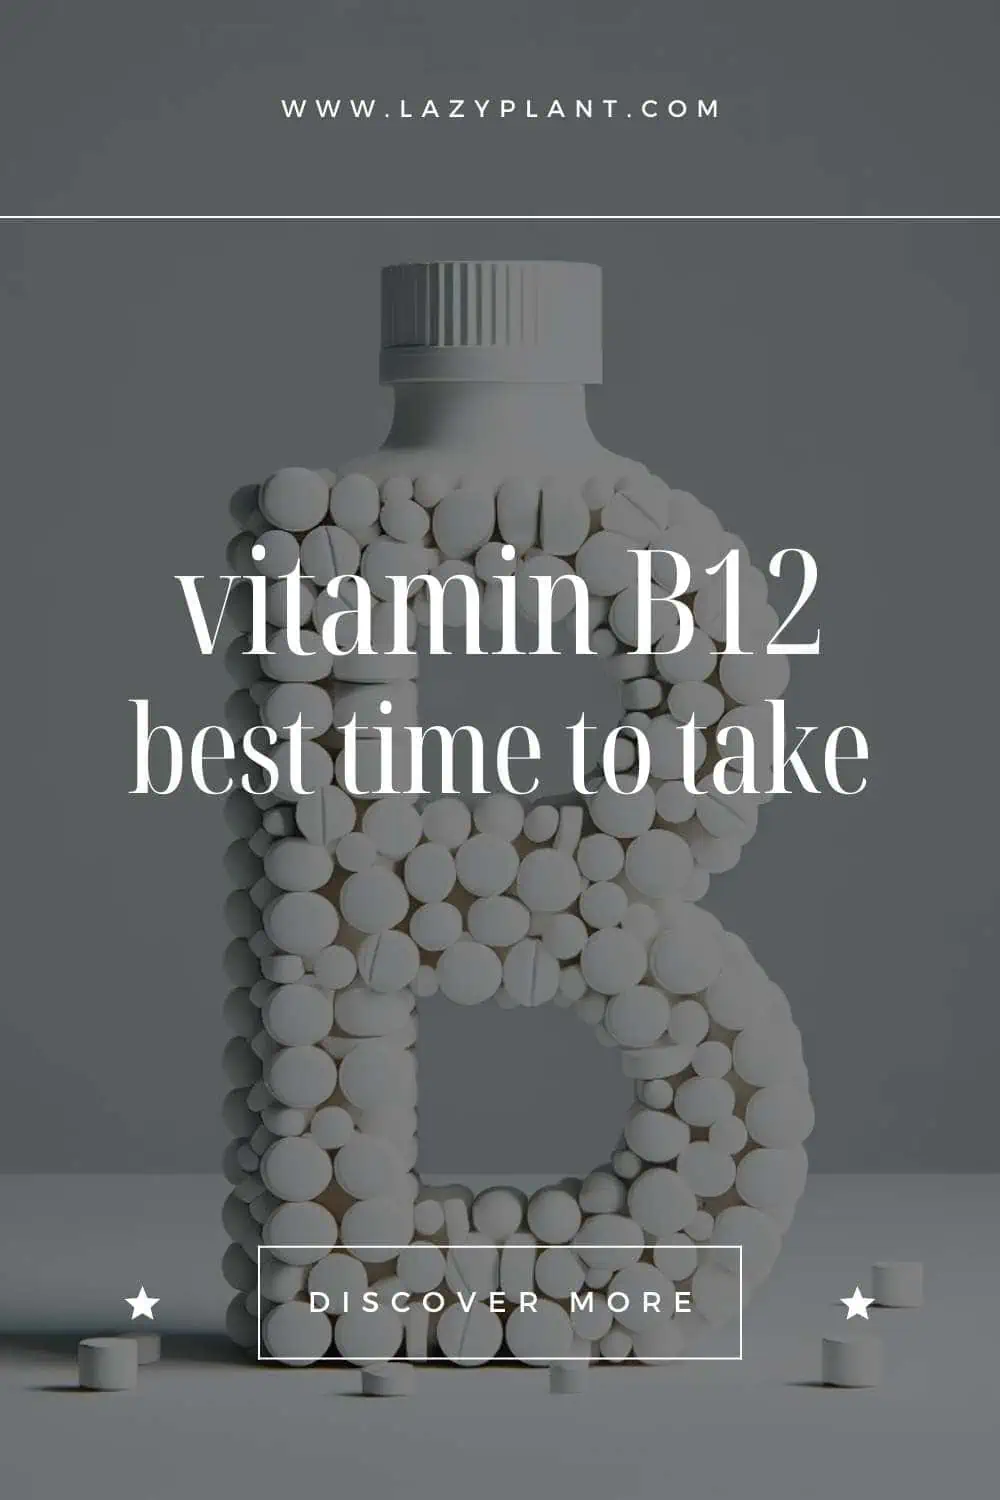 Should I take vitamin B12 supplements in the morning or night?